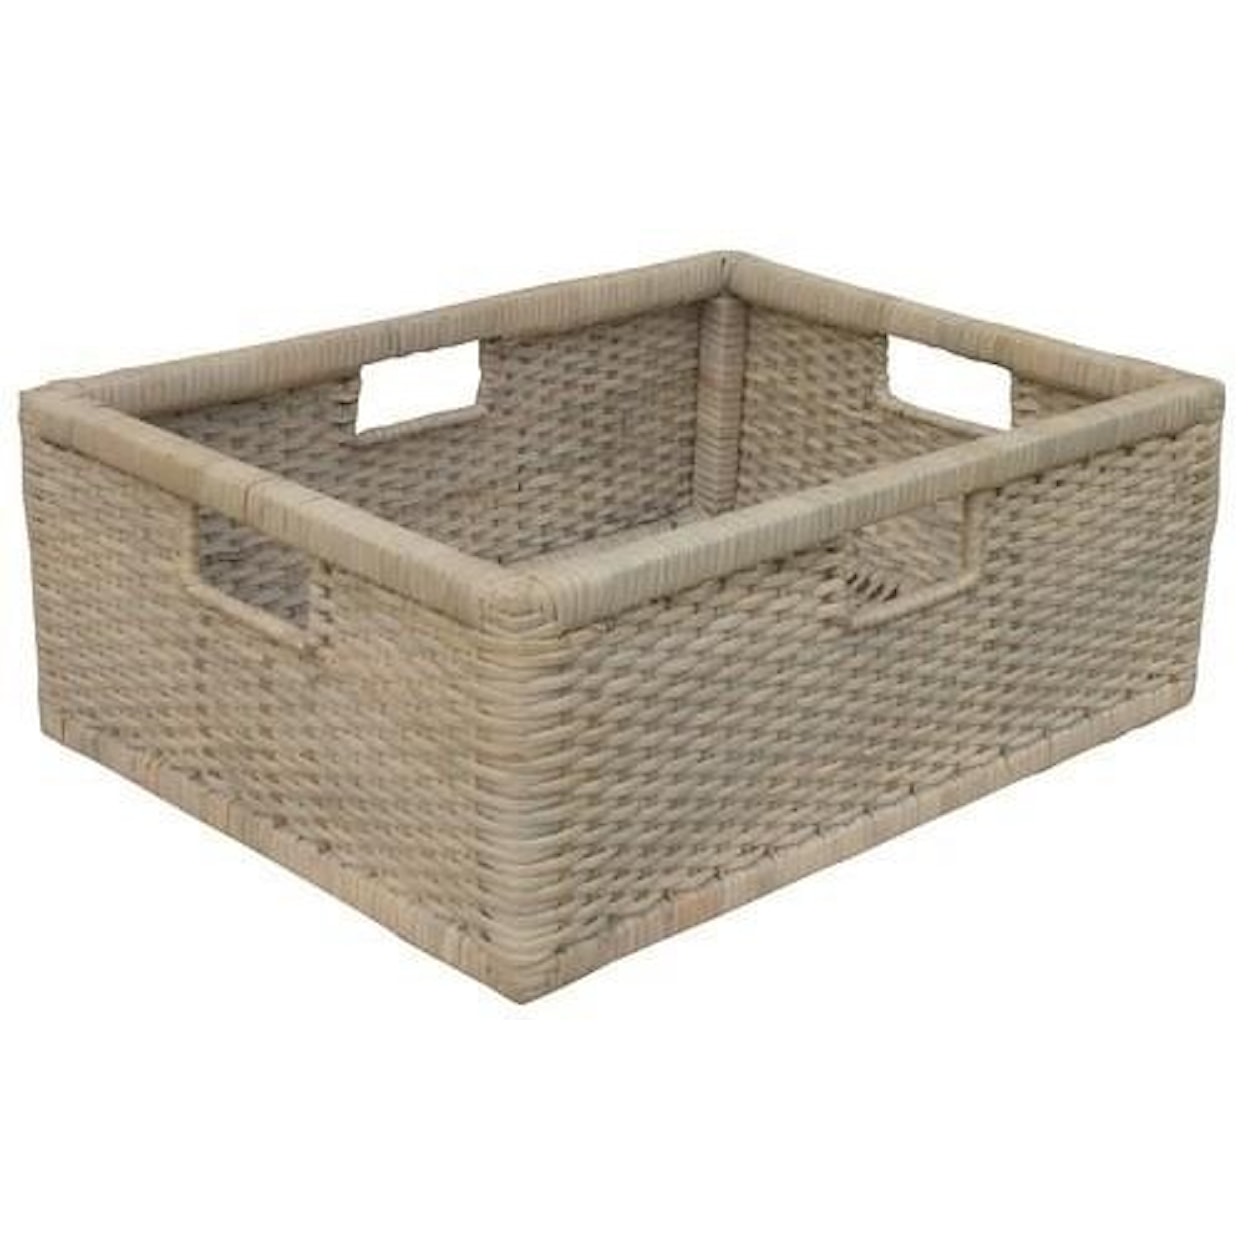 Trade Winds Furniture Accents and Accessories Cane Media Basket